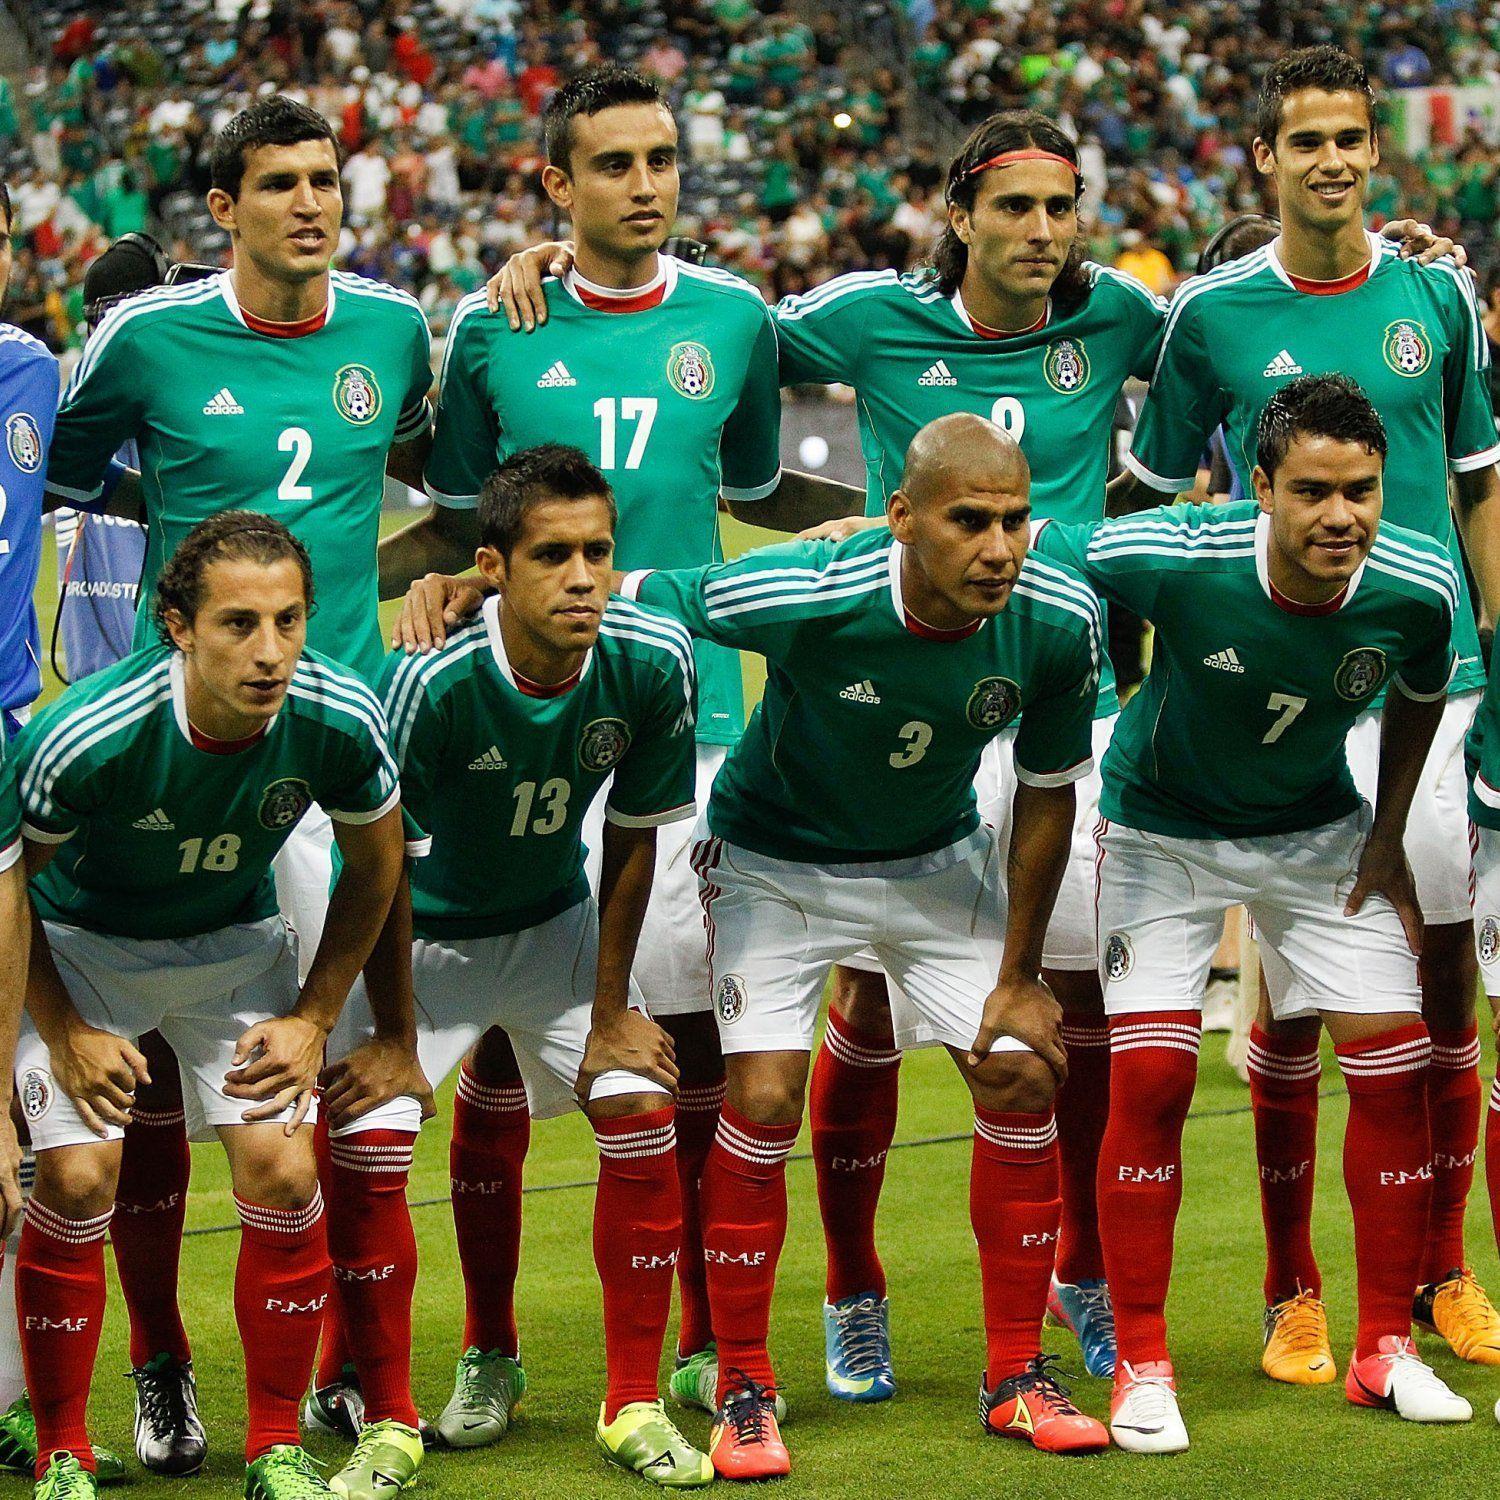 Mexico Soccer Team Wallpapers 2015 Jpg - Wallpaper Cave